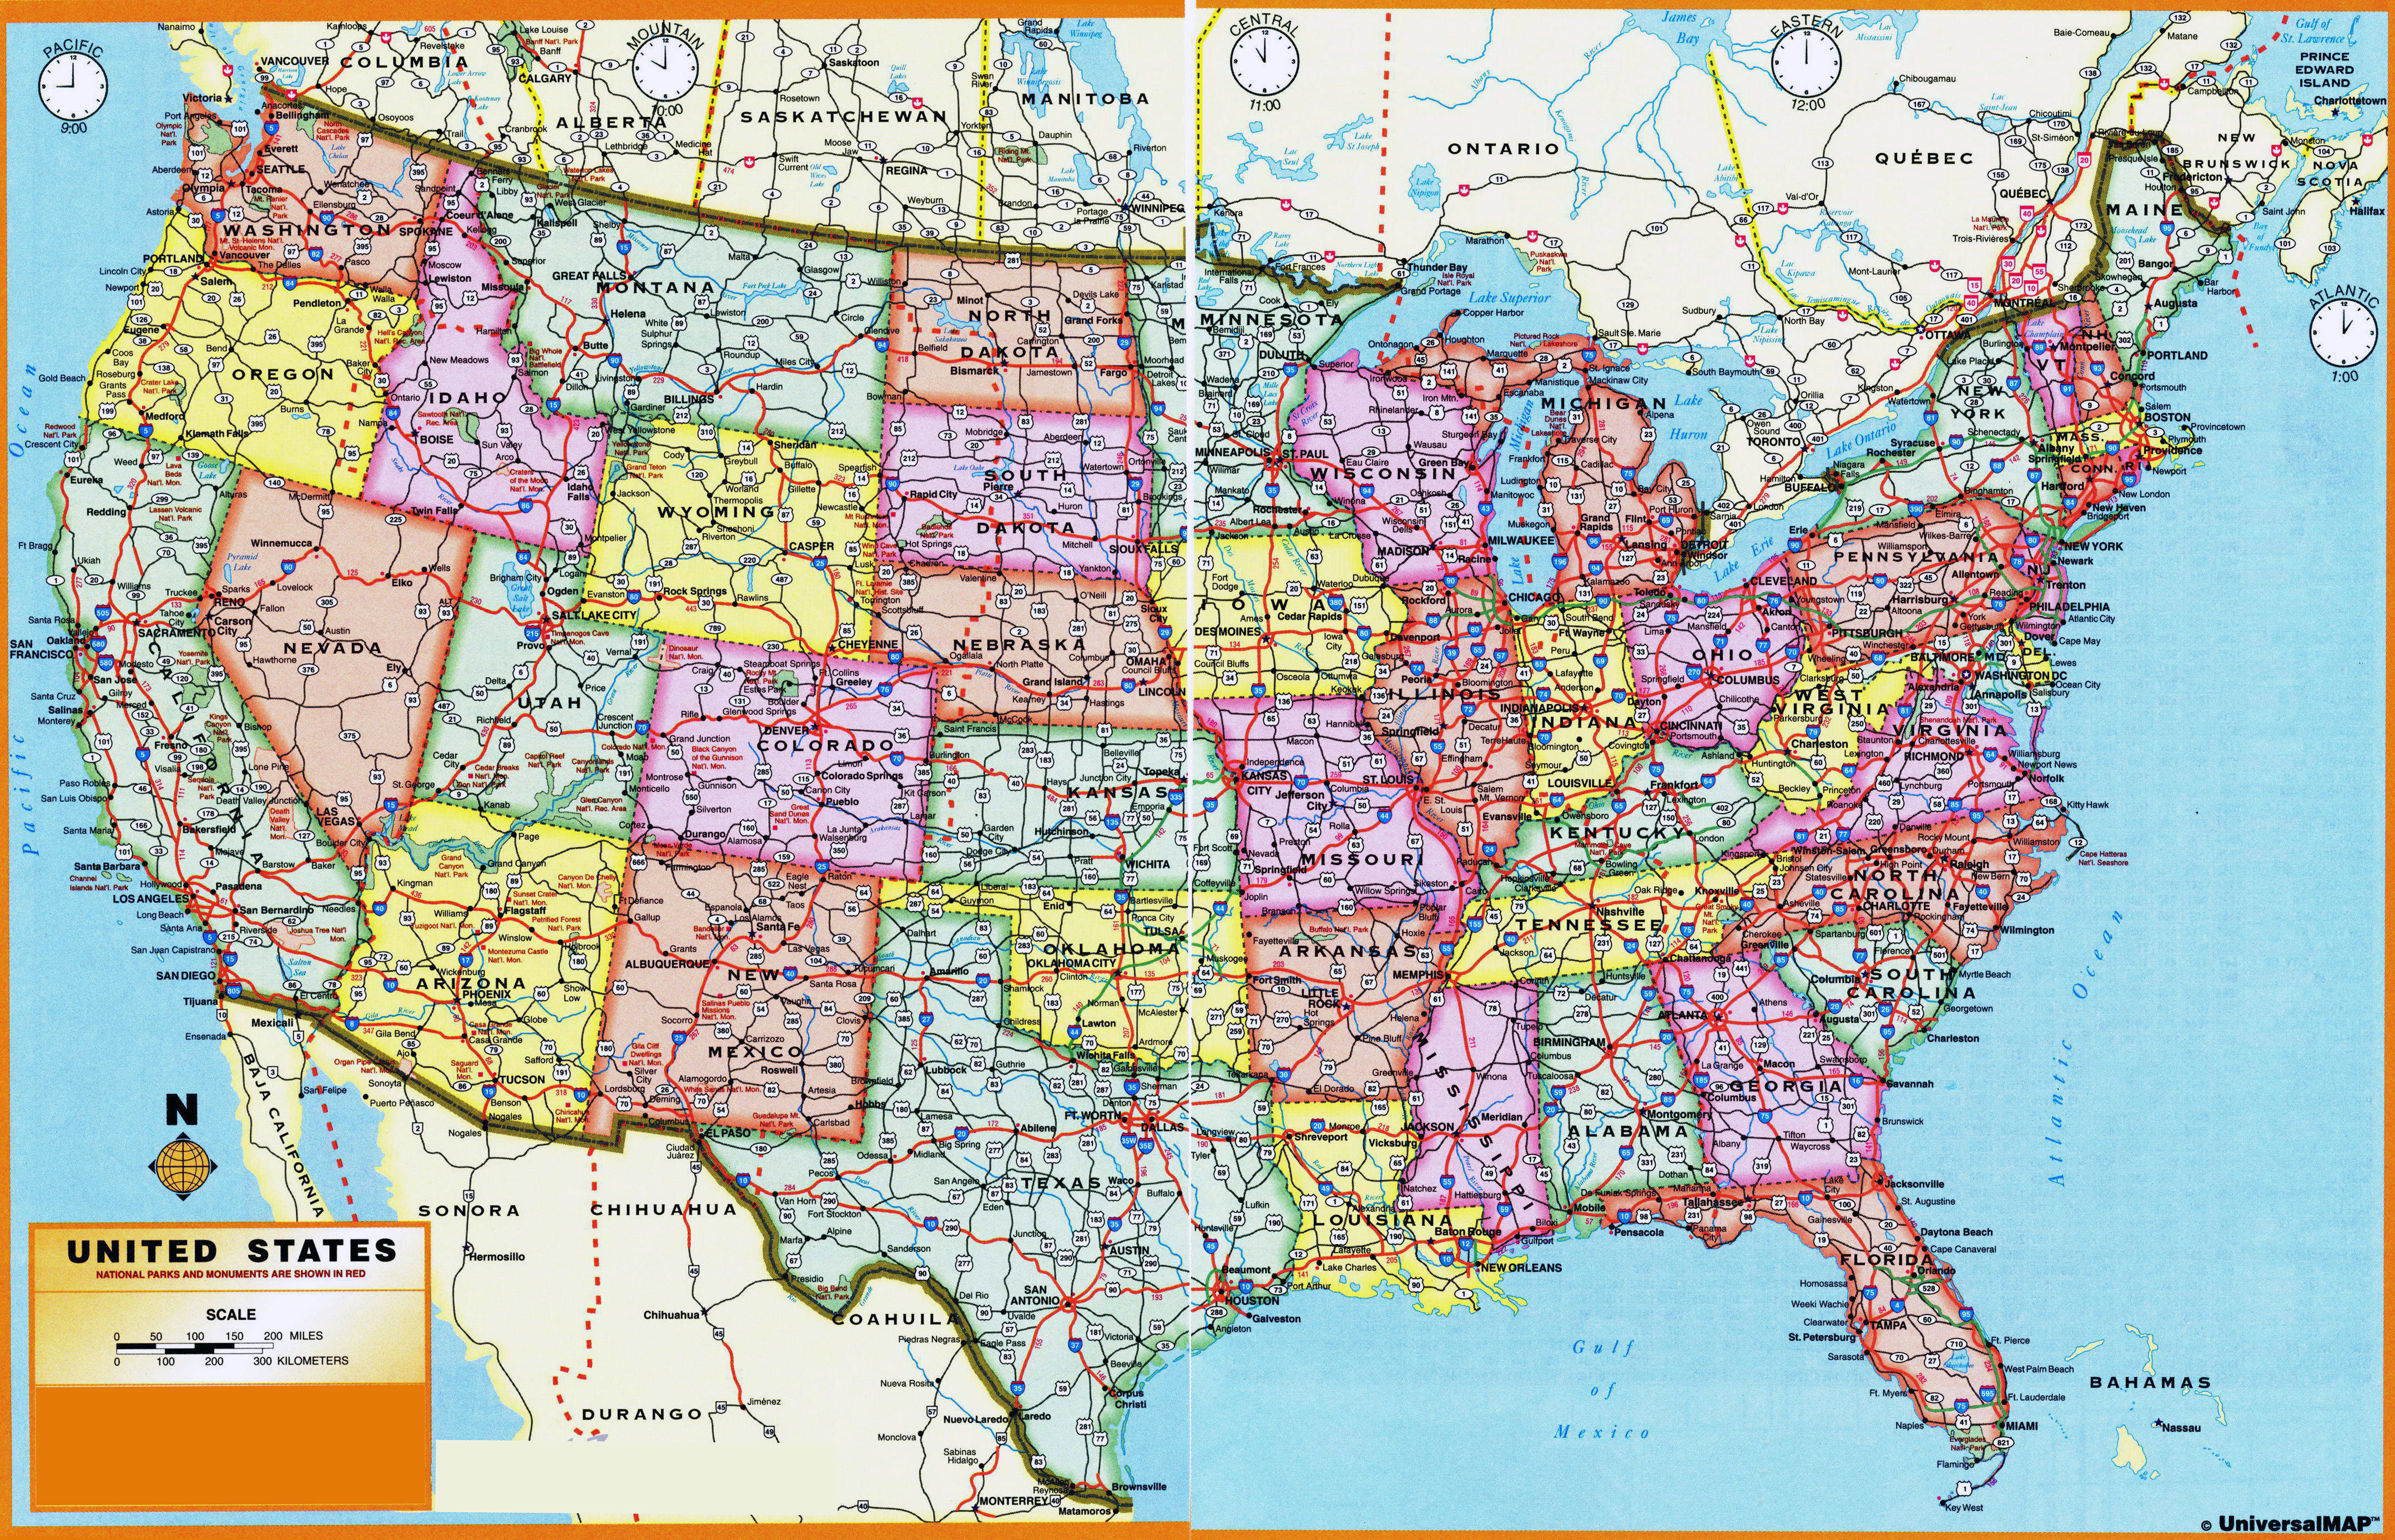 large-scale-administrative-divisions-map-of-the-usa-usa-maps-of-the-usa-maps-collection-of